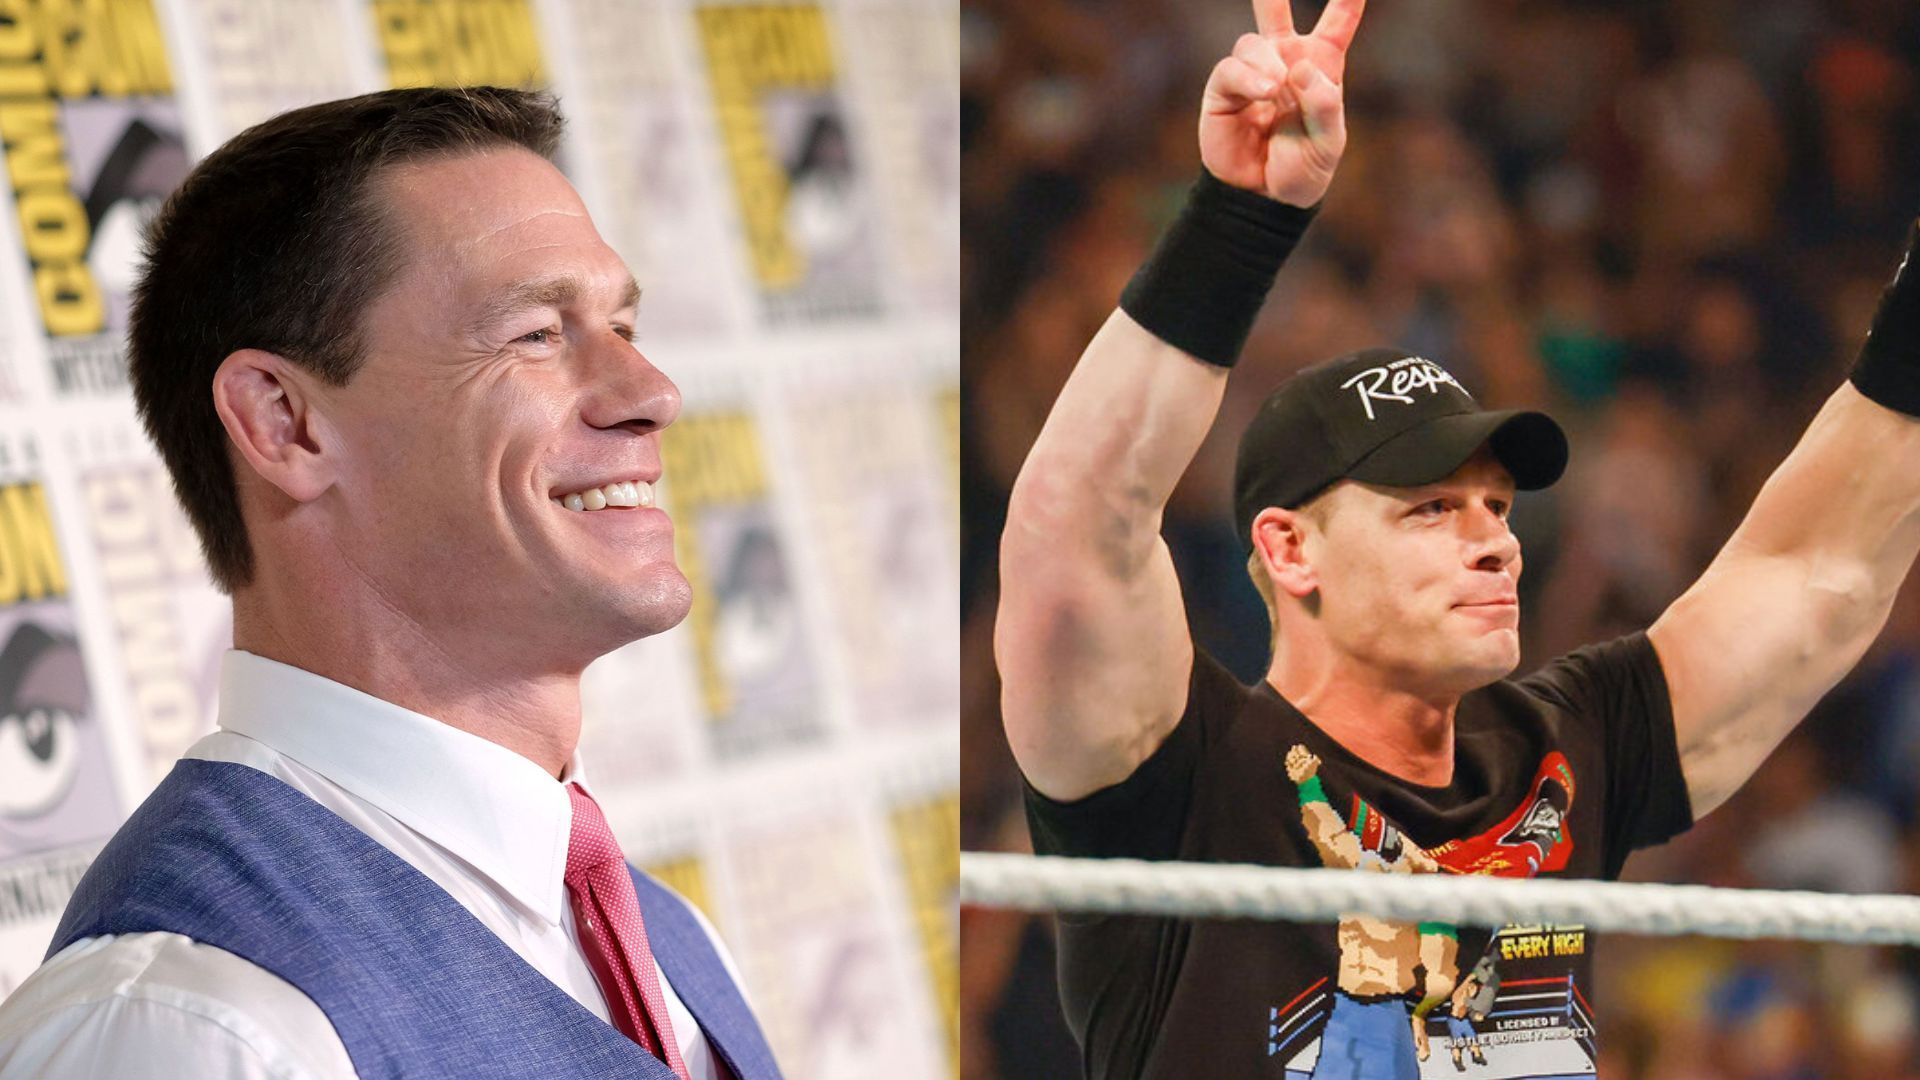 John Cena has starred in multiple movies and TV shows